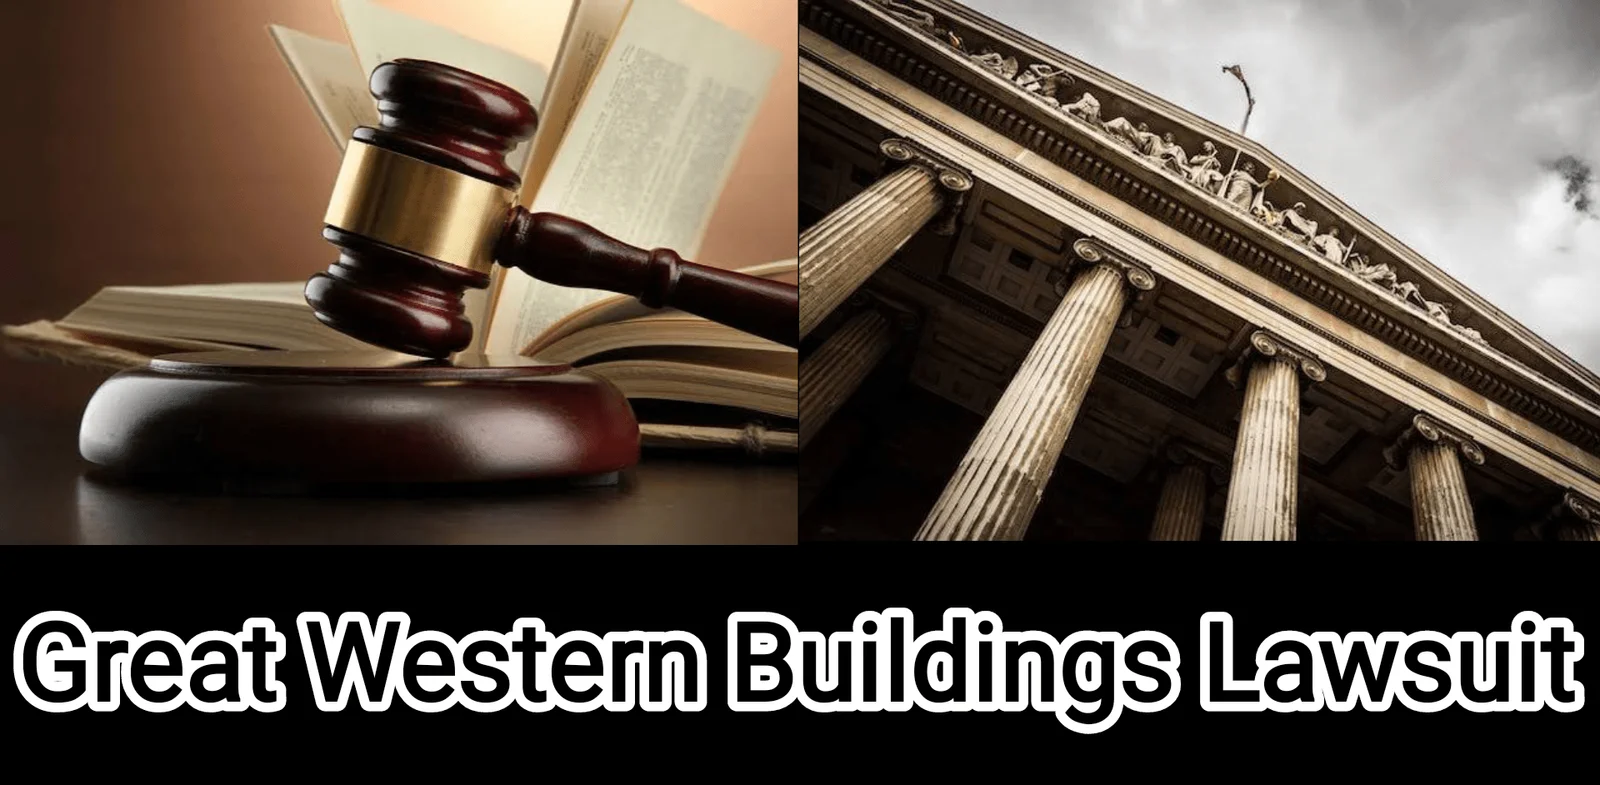 The Great Western Buildings Lawsuit: Unveiling the Legal Battle Surrounding Iconic Western Architecture